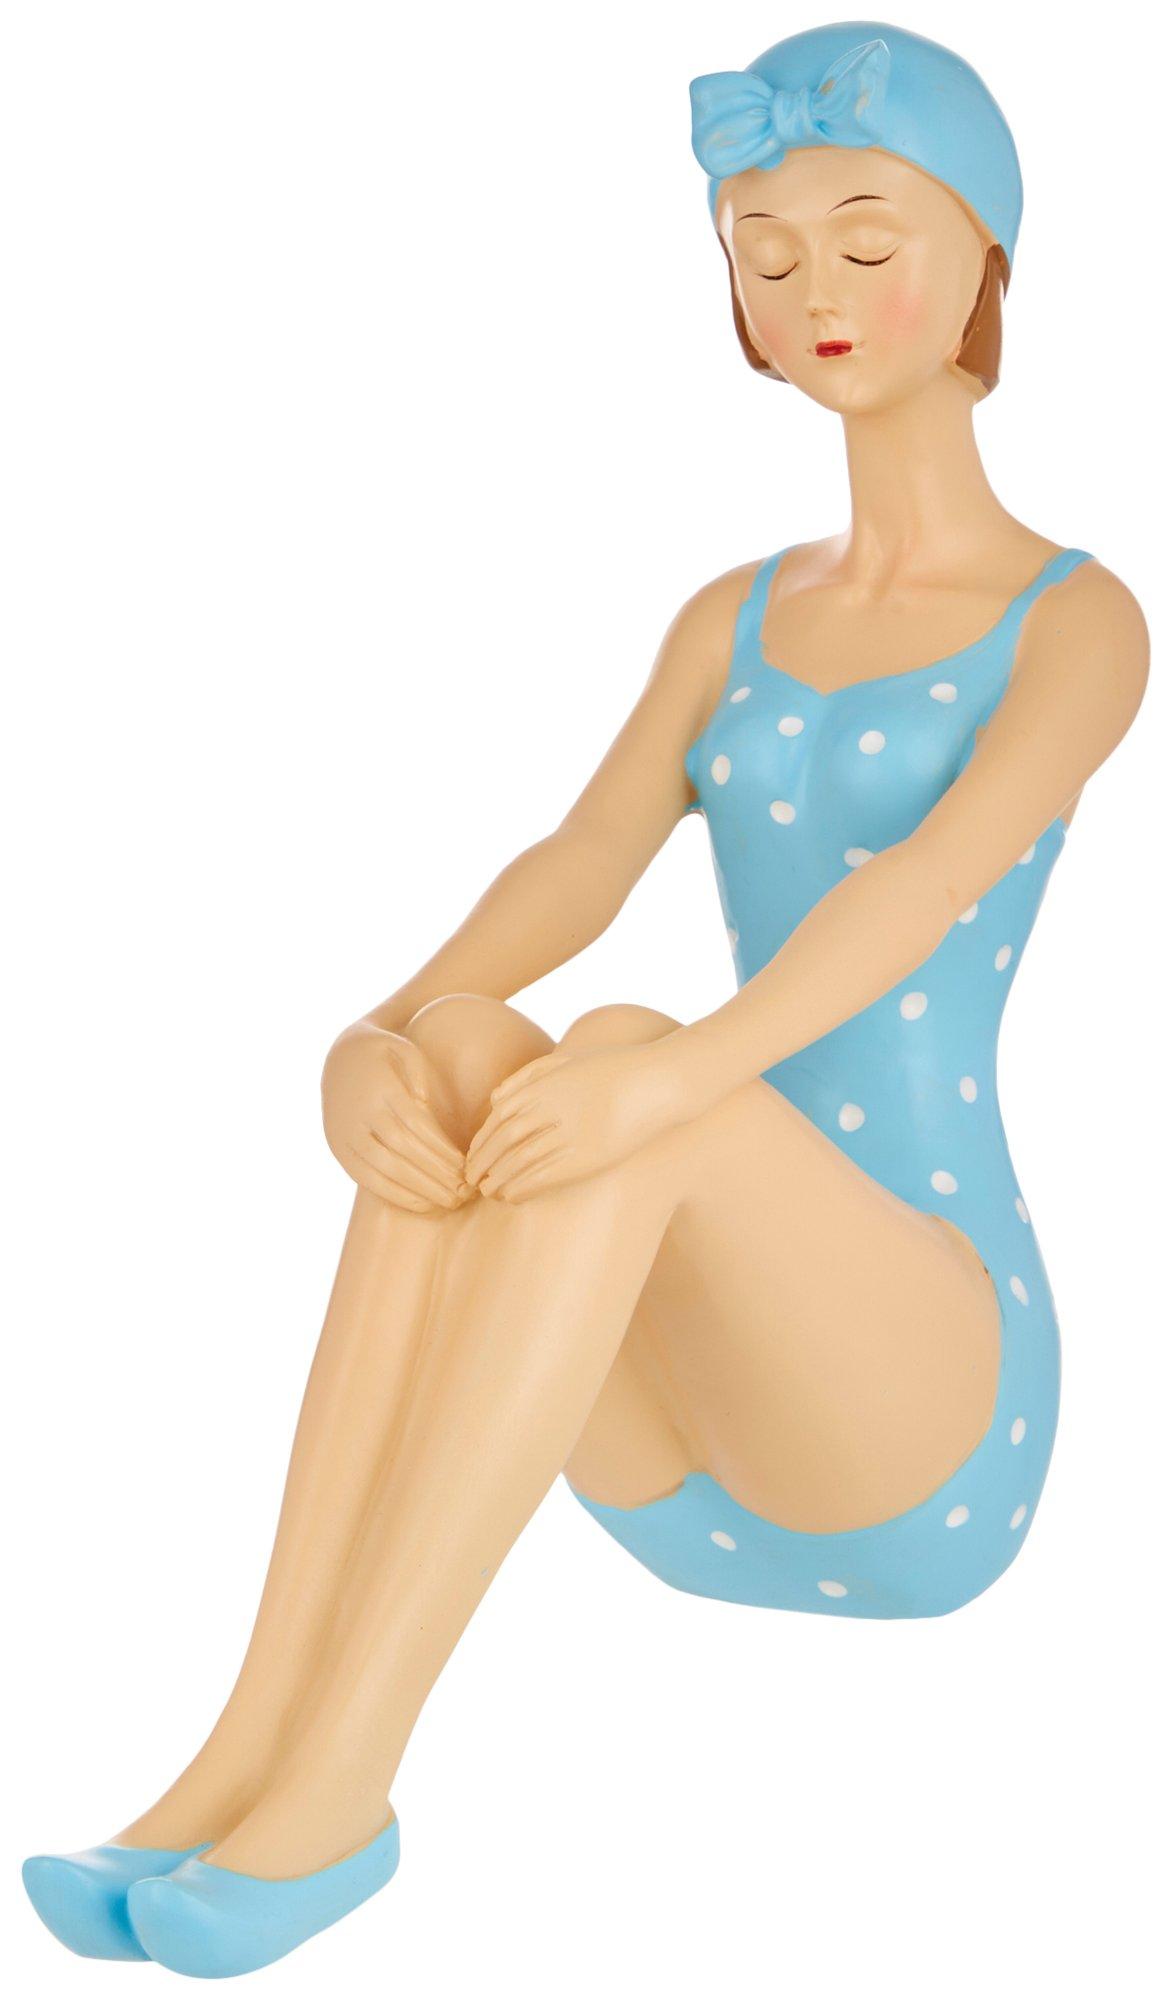 Fancy That 8 in. Vintage Swimmer Lady Decorative